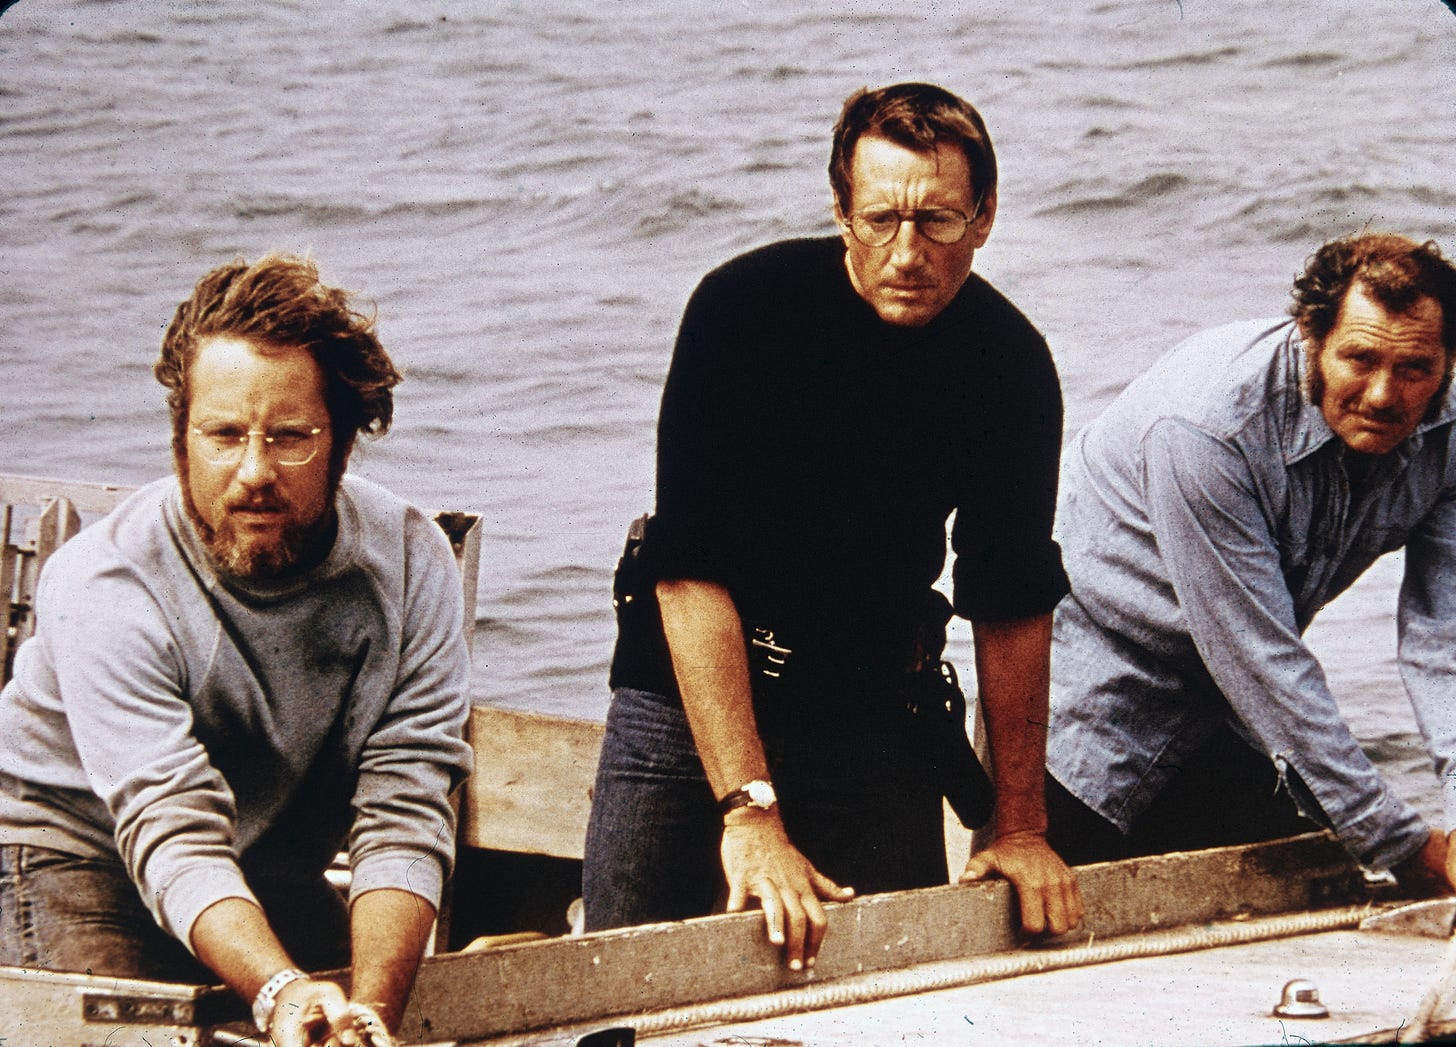 Three men in a boat wear looks of concern